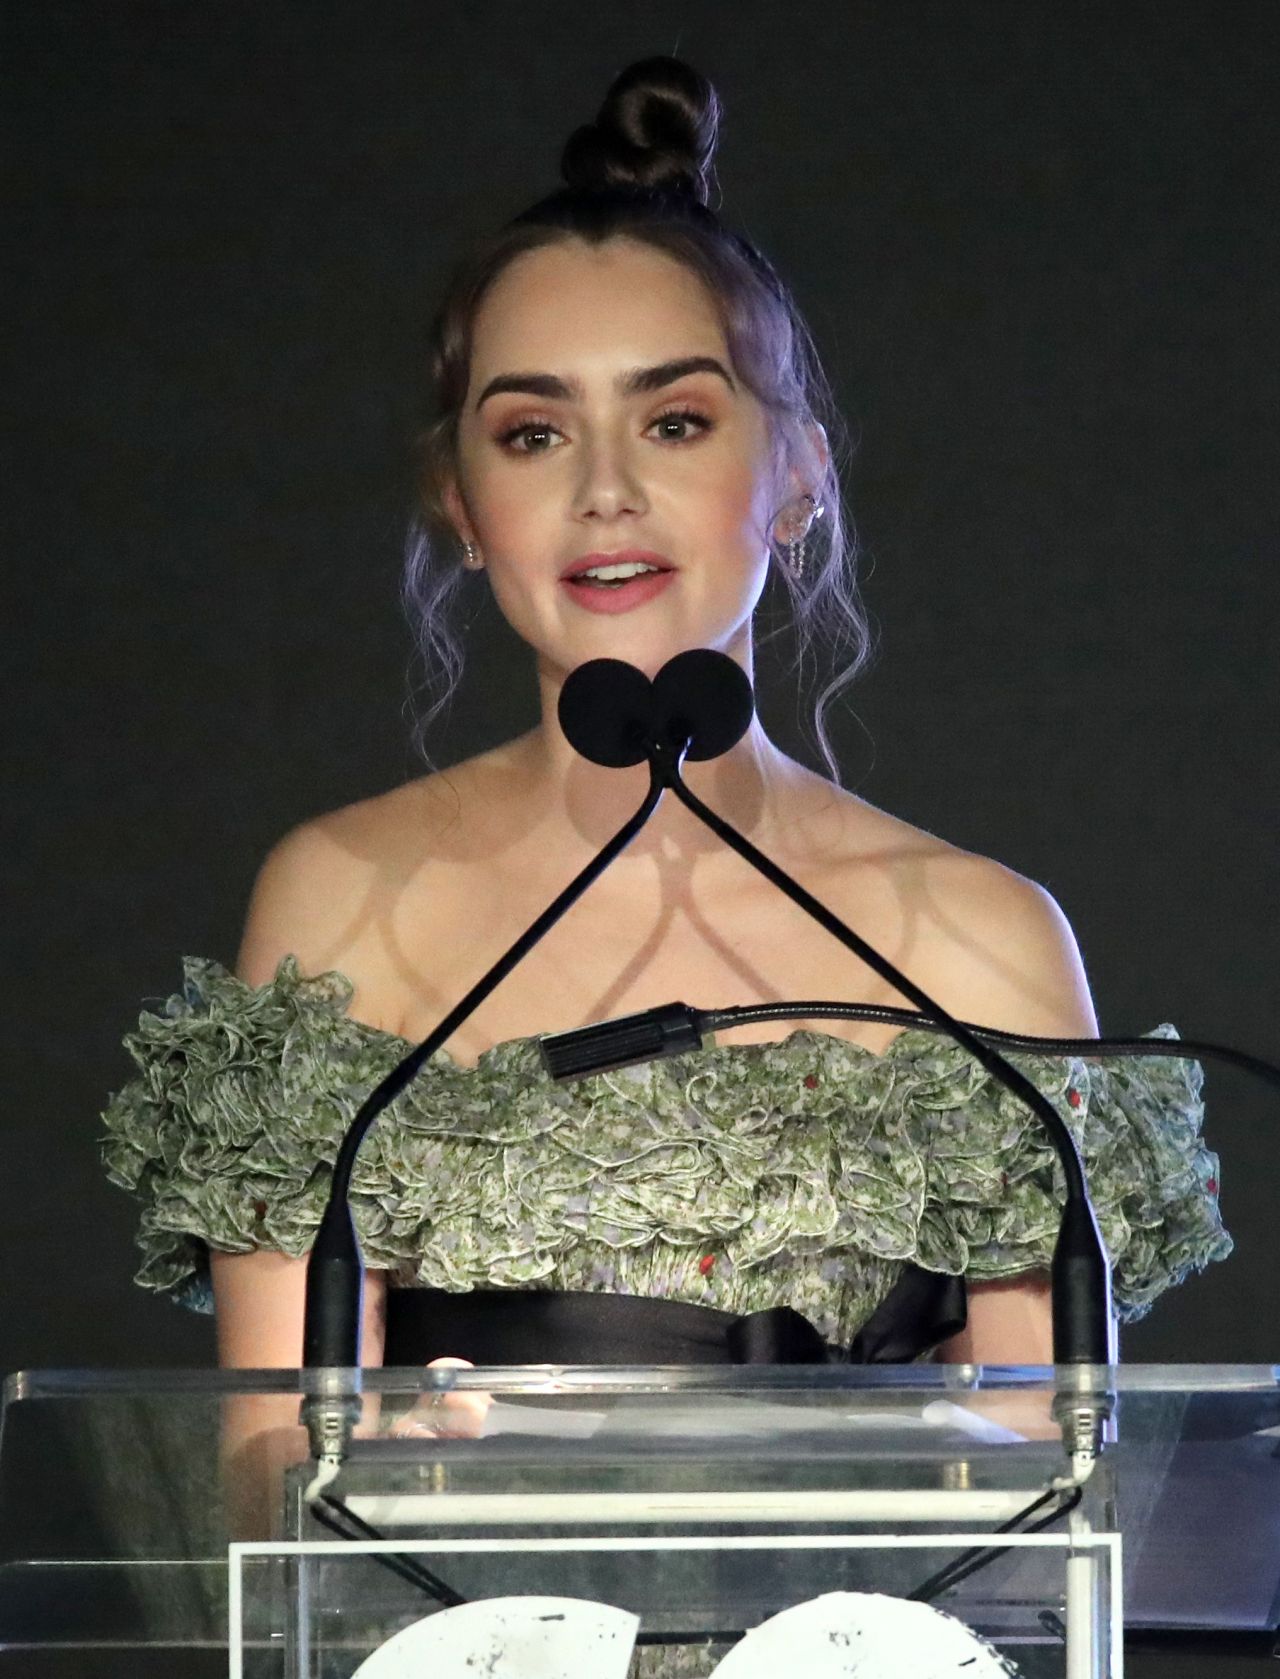 lily-collins-go-campaign-gala-in-los-angeles-10-20-2018-1.jpg